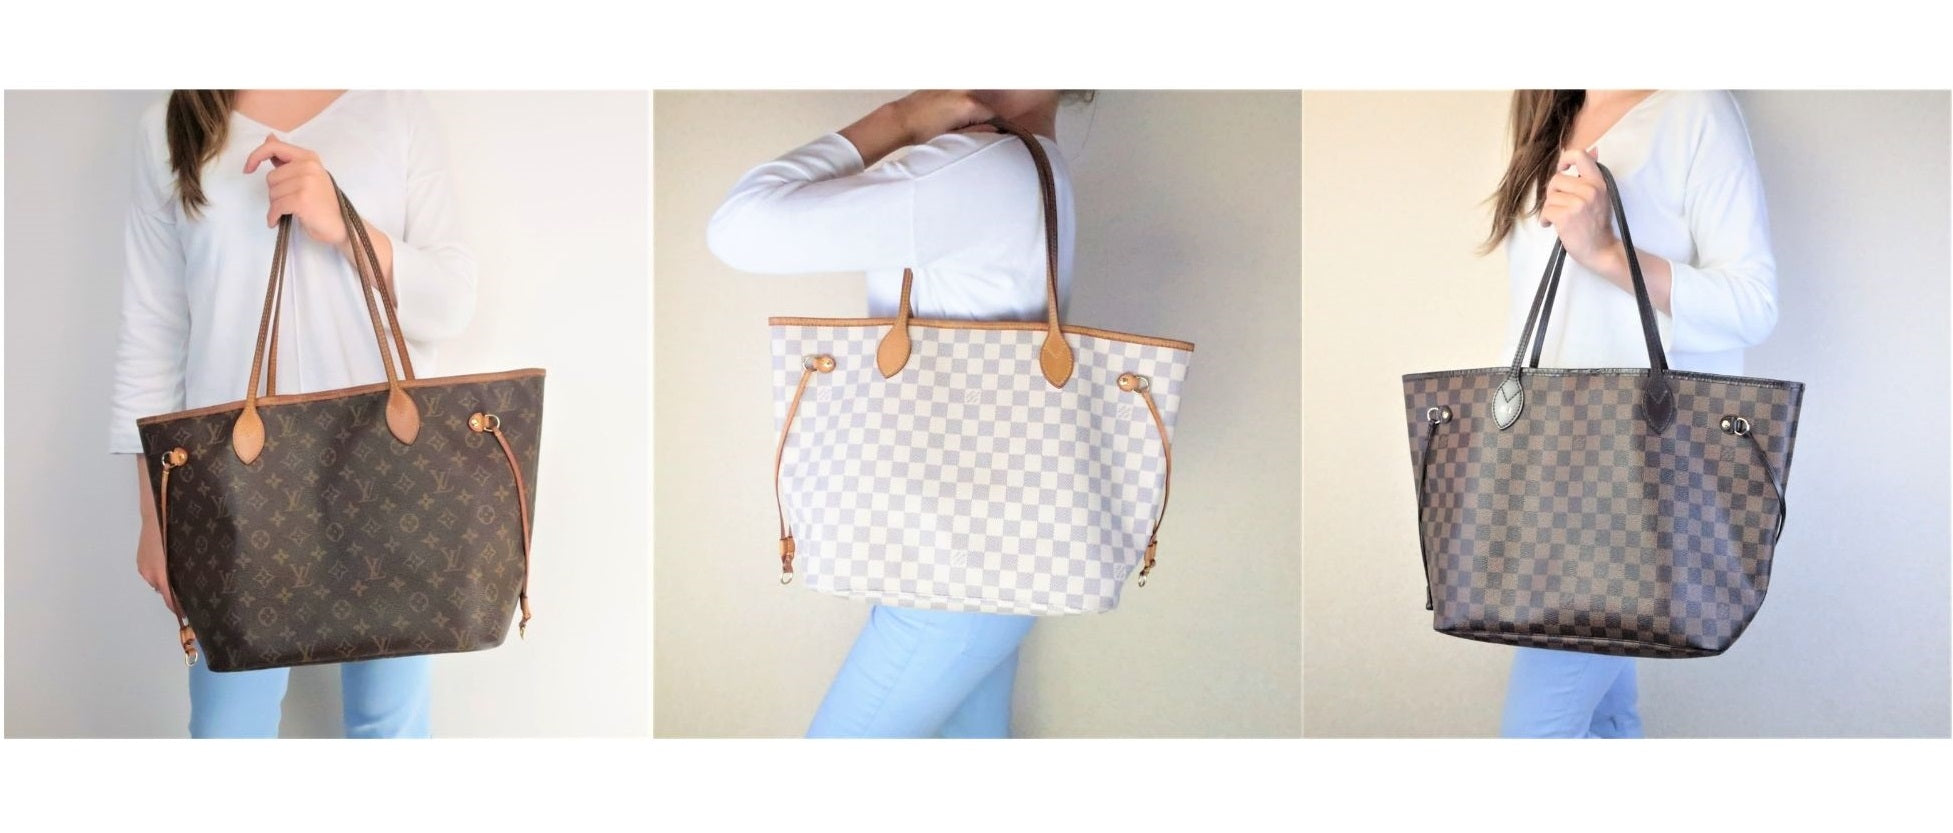 Why You Should Invest in Louis Vuitton Neverfull MM Right Now Which Louis Vuitton Neverfull - Monogram, Damier Ebene or Damier Azur - Is the Best for Investment?